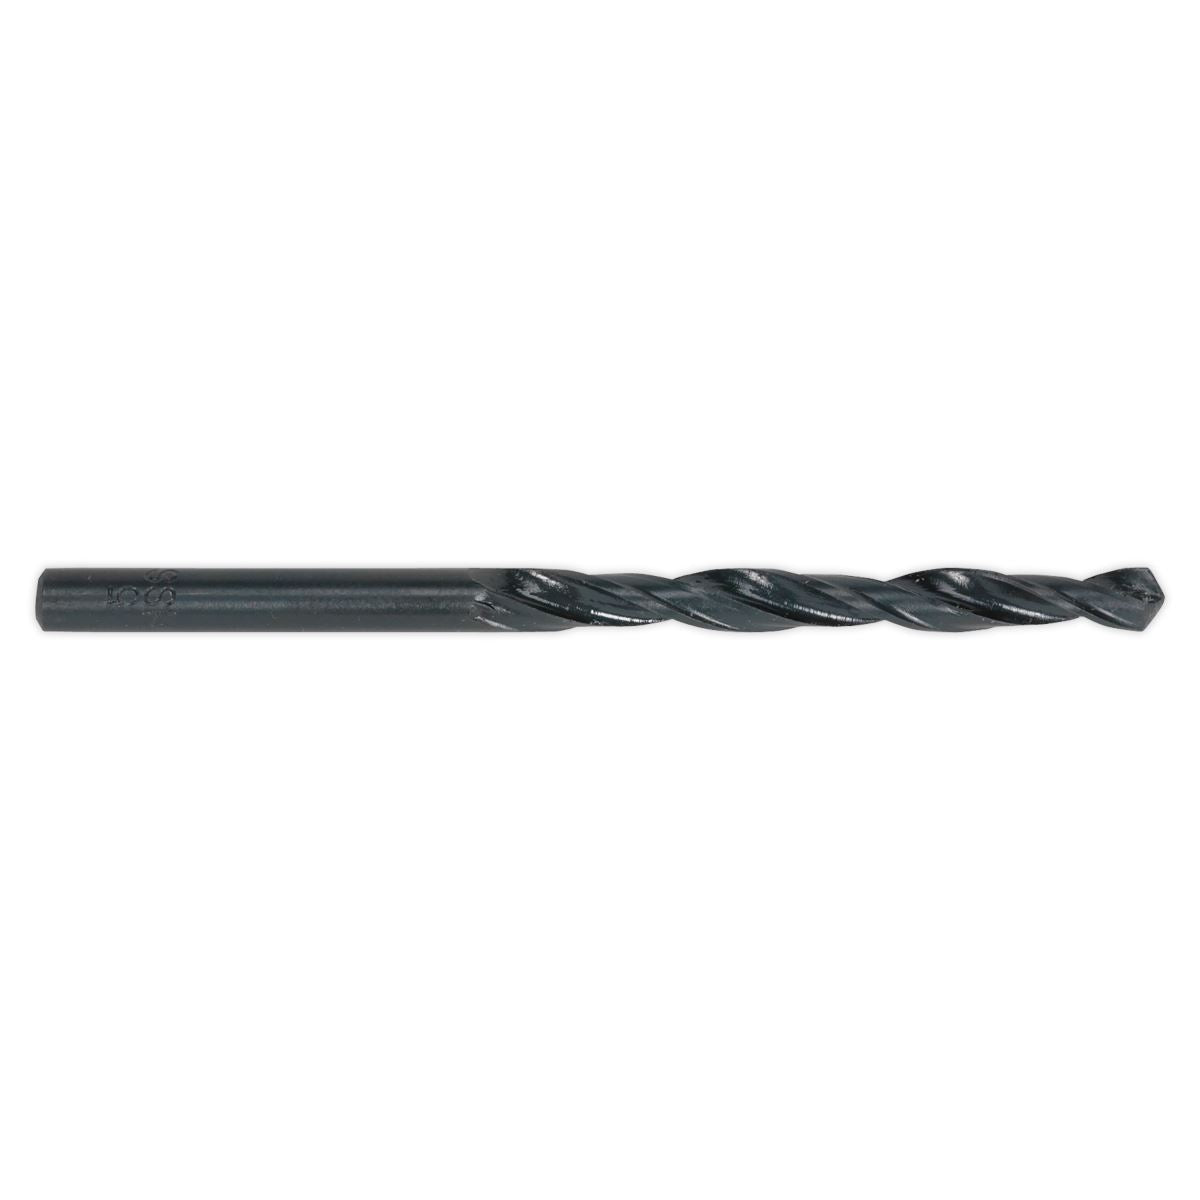 Sealey HSS Roll Forged Drill Bit Ø1mm Pack of 10